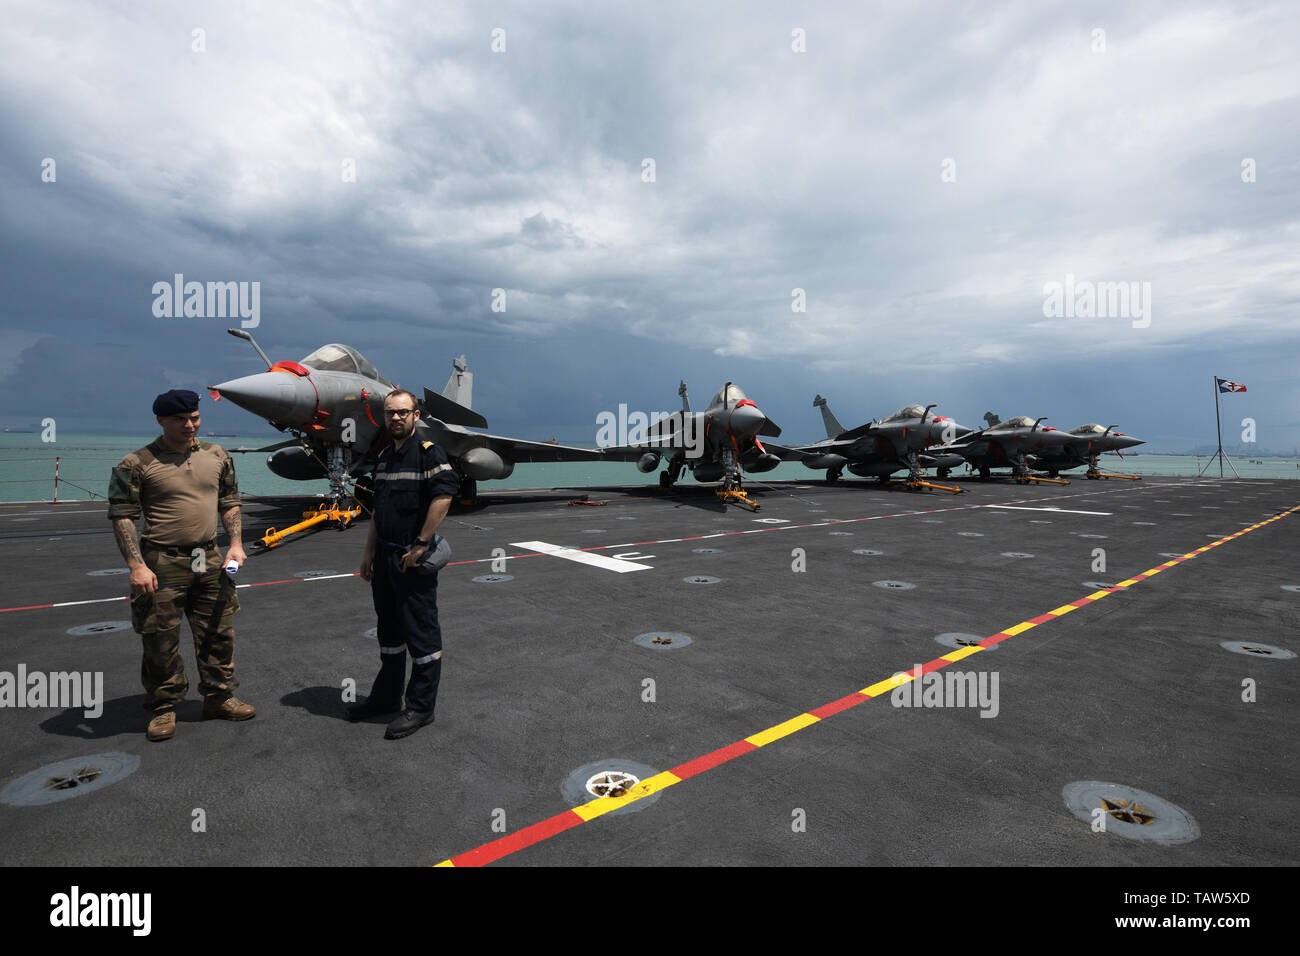 Singapore, Singapore. 28th May, 2019. Five Rafale fighter aircrafts are seen on the flight deck of French aircraft carrier Charles de Gaulle docked at Changi Naval Base, Singapore, May 28, 2019. Credit: Then Chih Wey/Xinhua/Alamy Live News Stock Photo